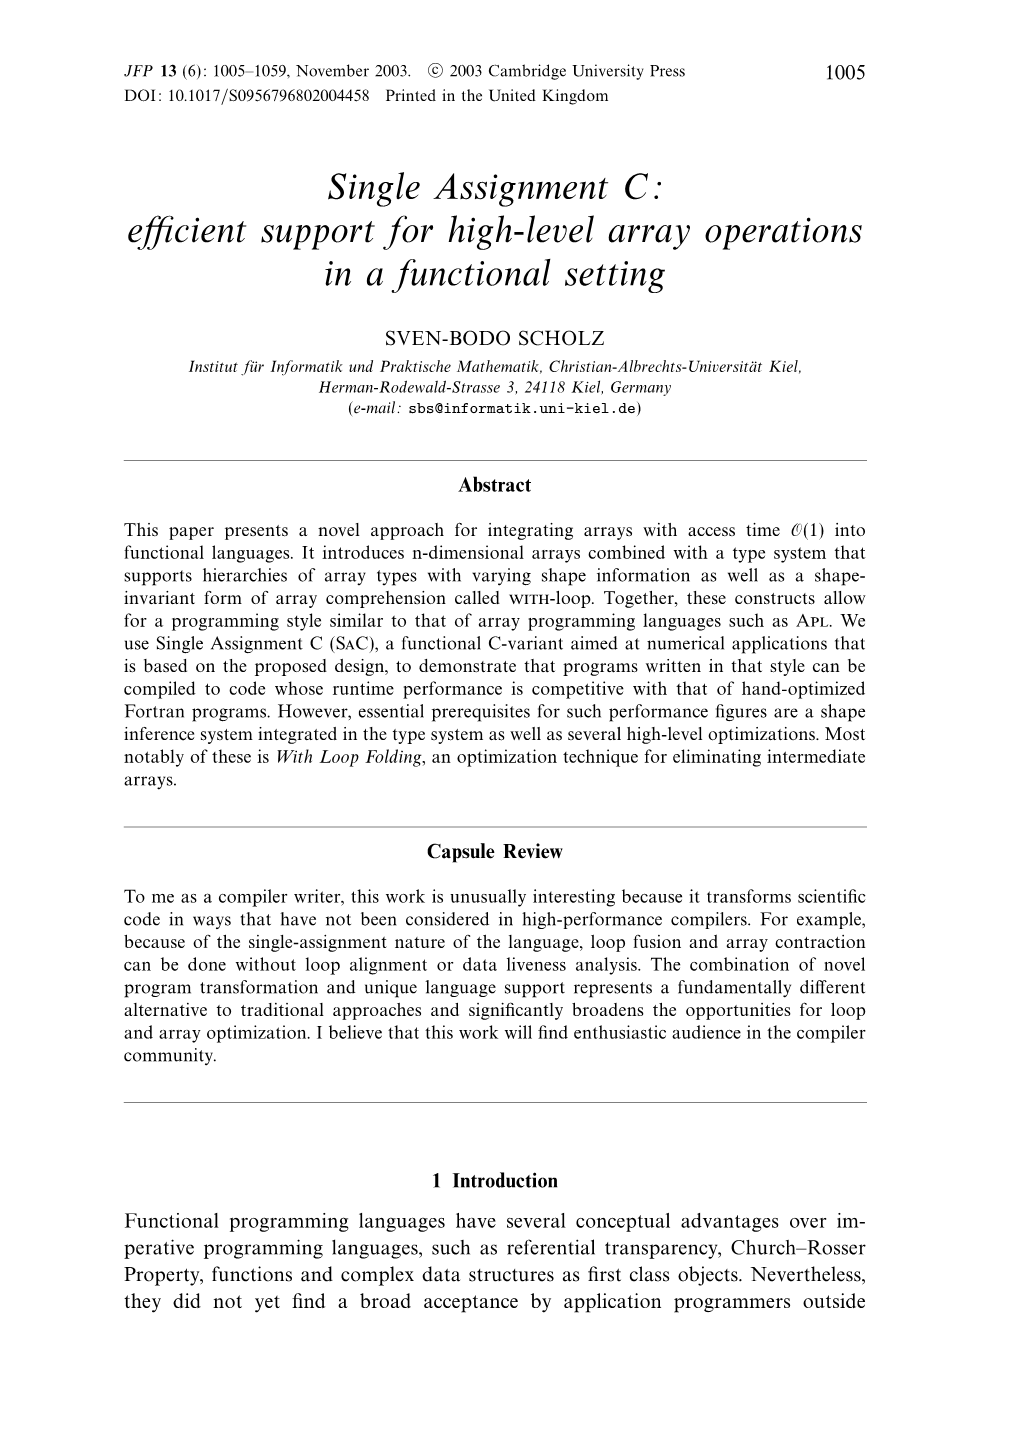 Efficient Support for High-Level Array Operations in a Functional Setting